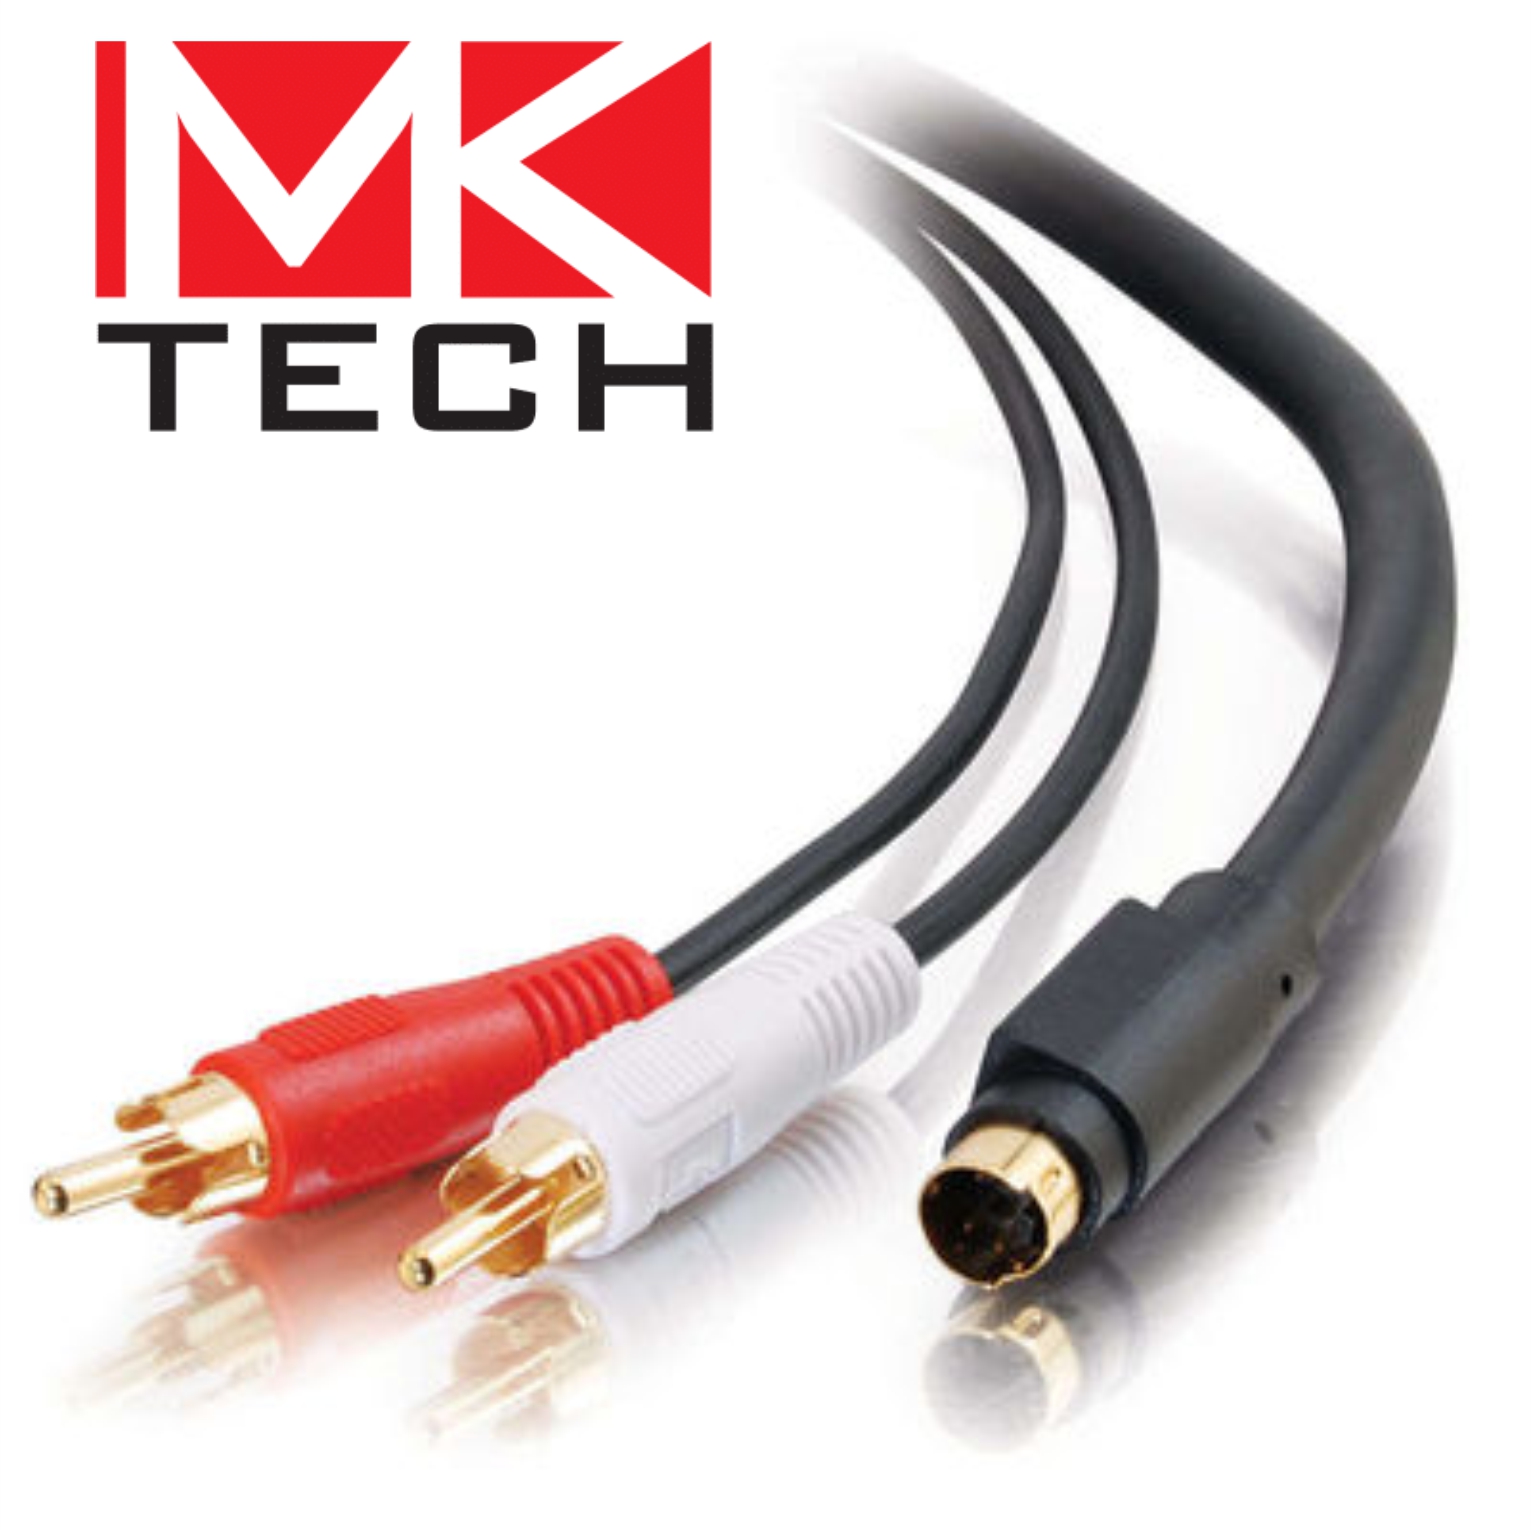 S-Video-M to Dual RCA-M Кабел (Y) 10m MKTECH